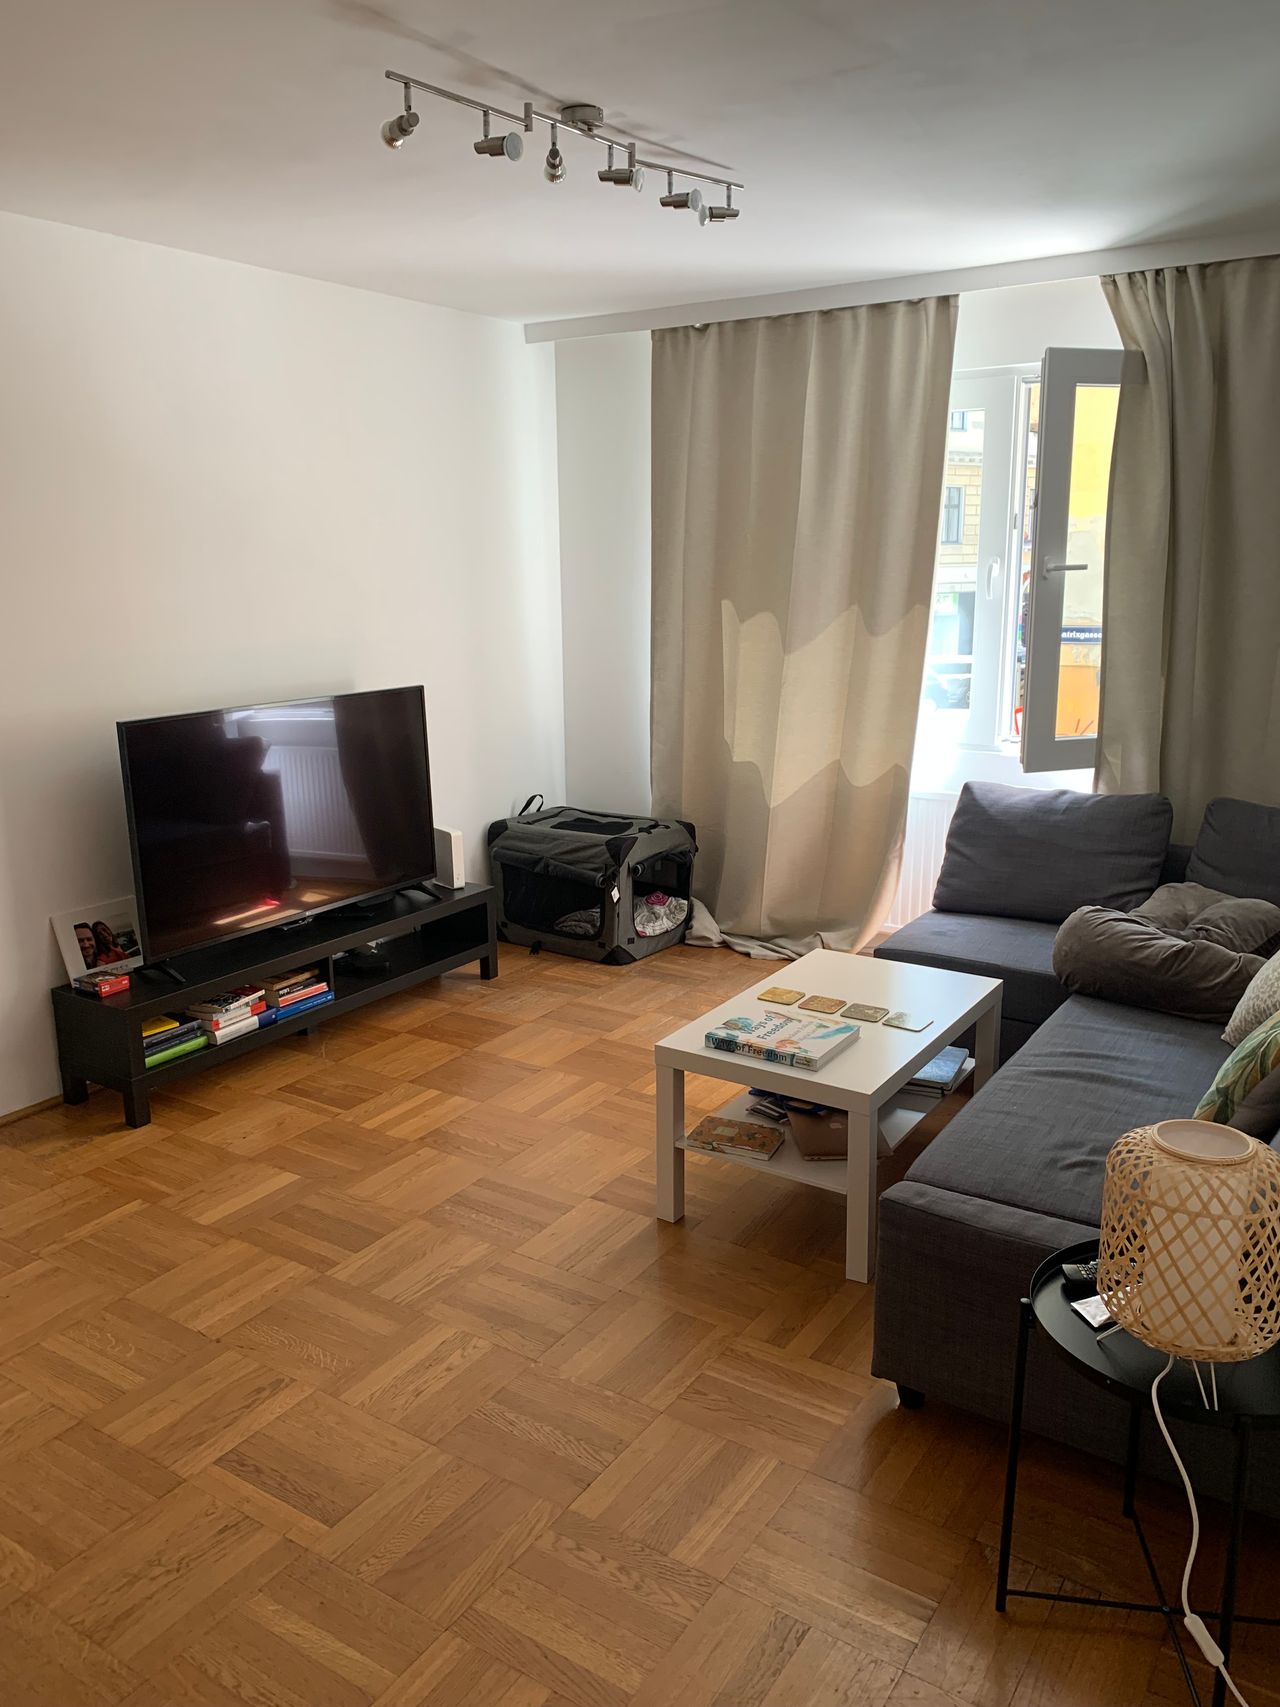 Location Location Location! 150m to the 1st district, middle of Vienna's diplomatic quarter! Fully furnished 2 bedroom apartment!